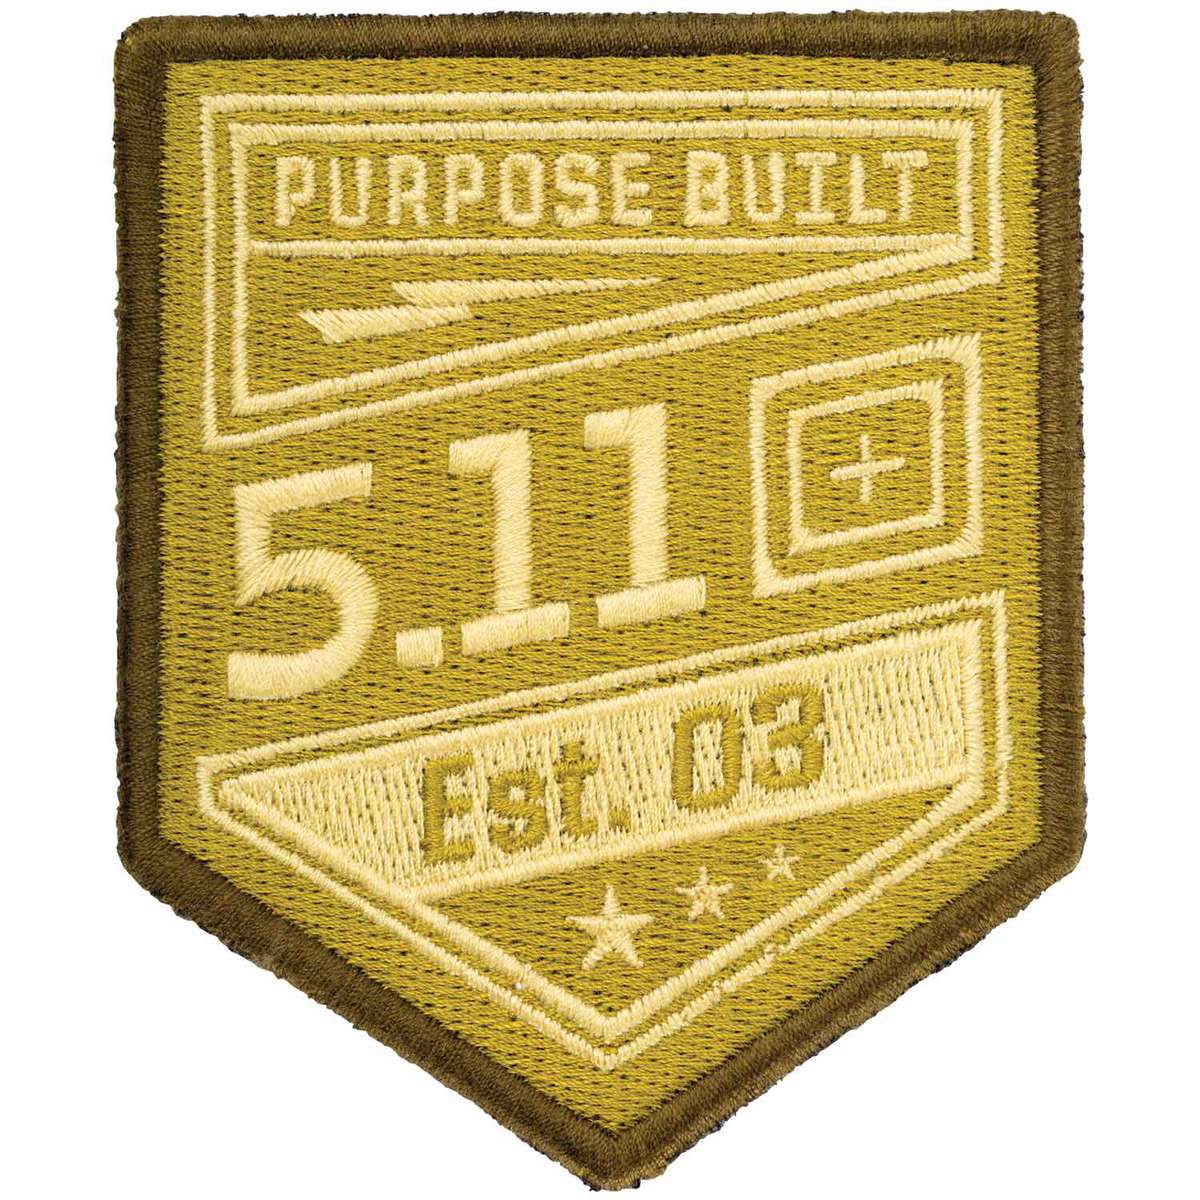 Patch with a Purpose